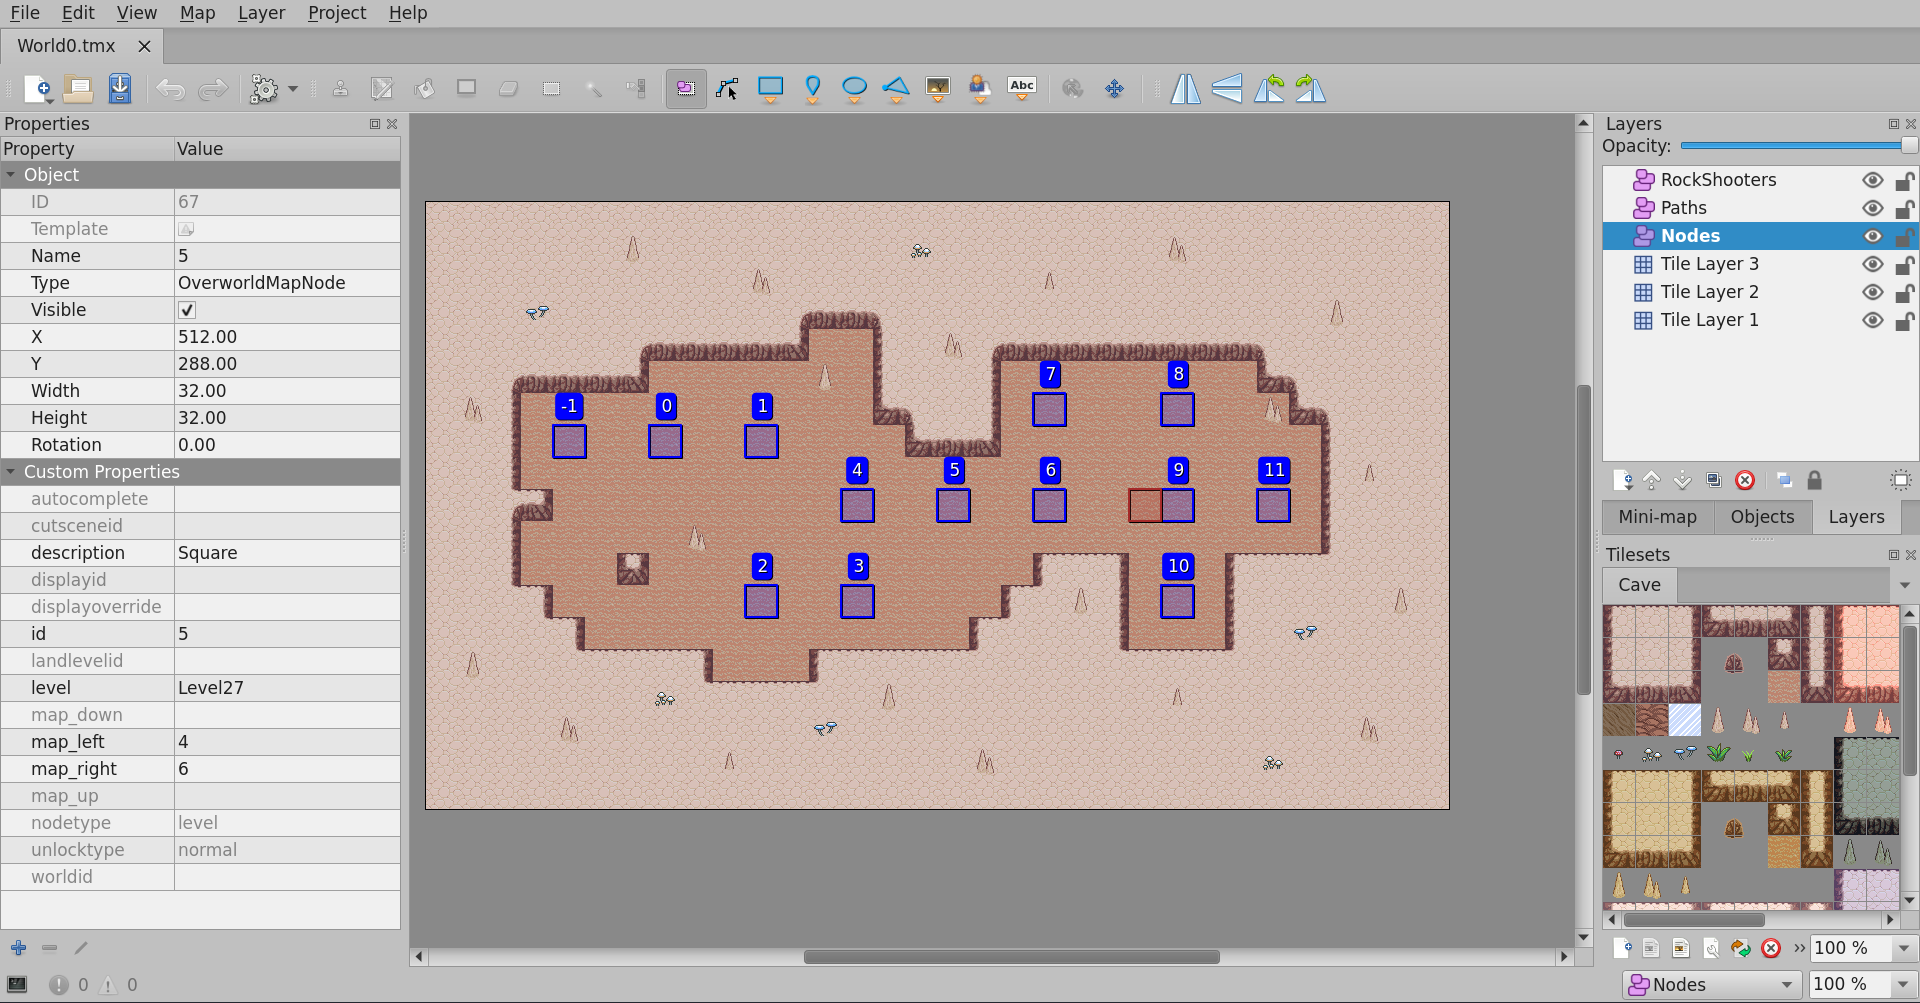 World 1, from the final release in the Tiled map editor